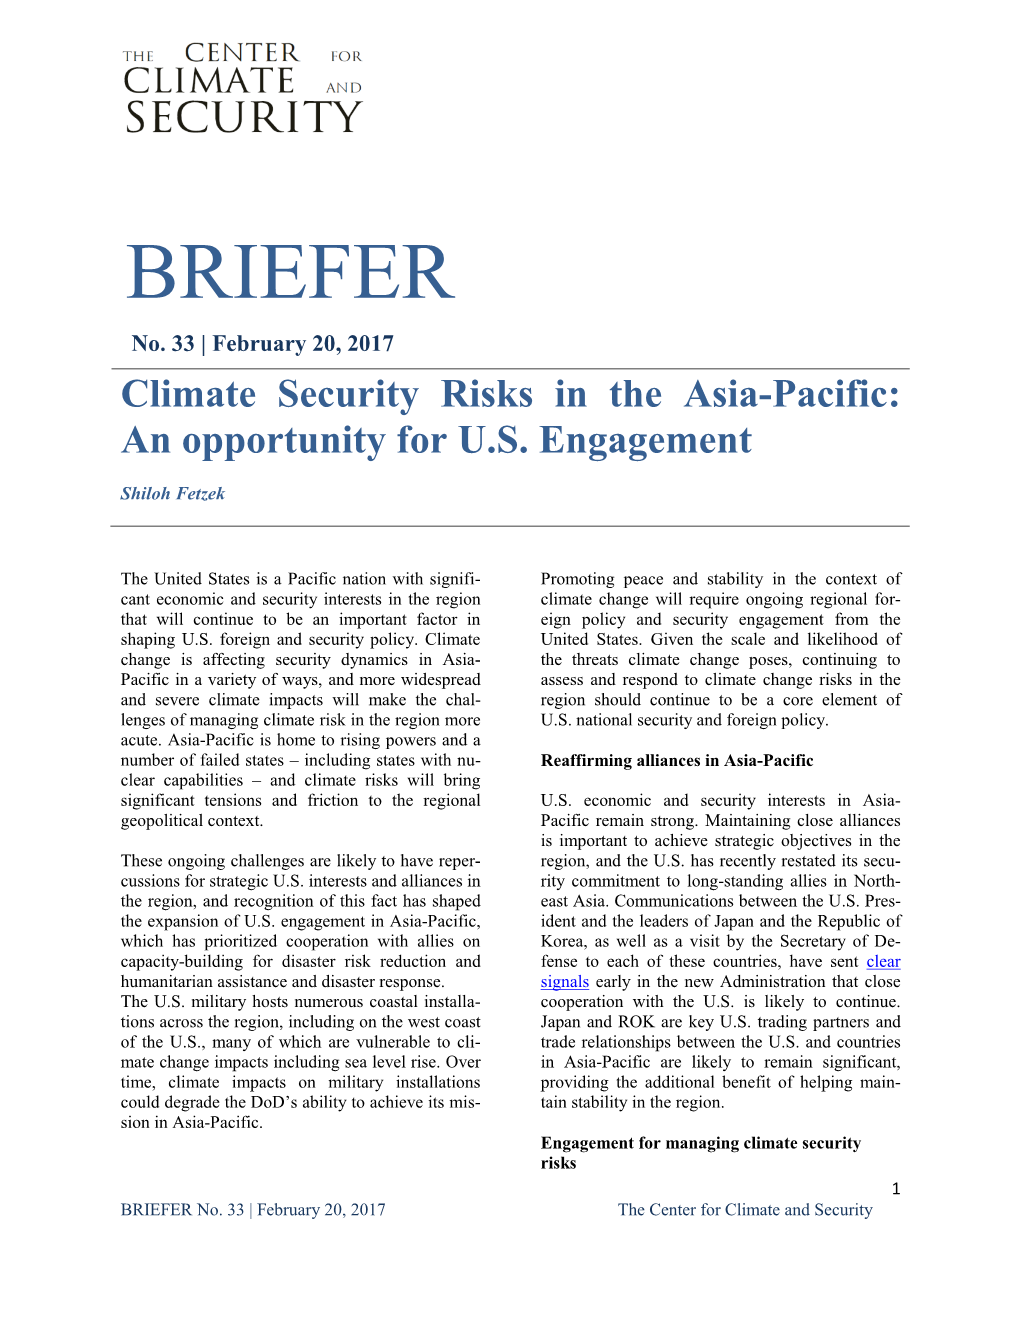 Climate Security Risks in the Asia Pacific